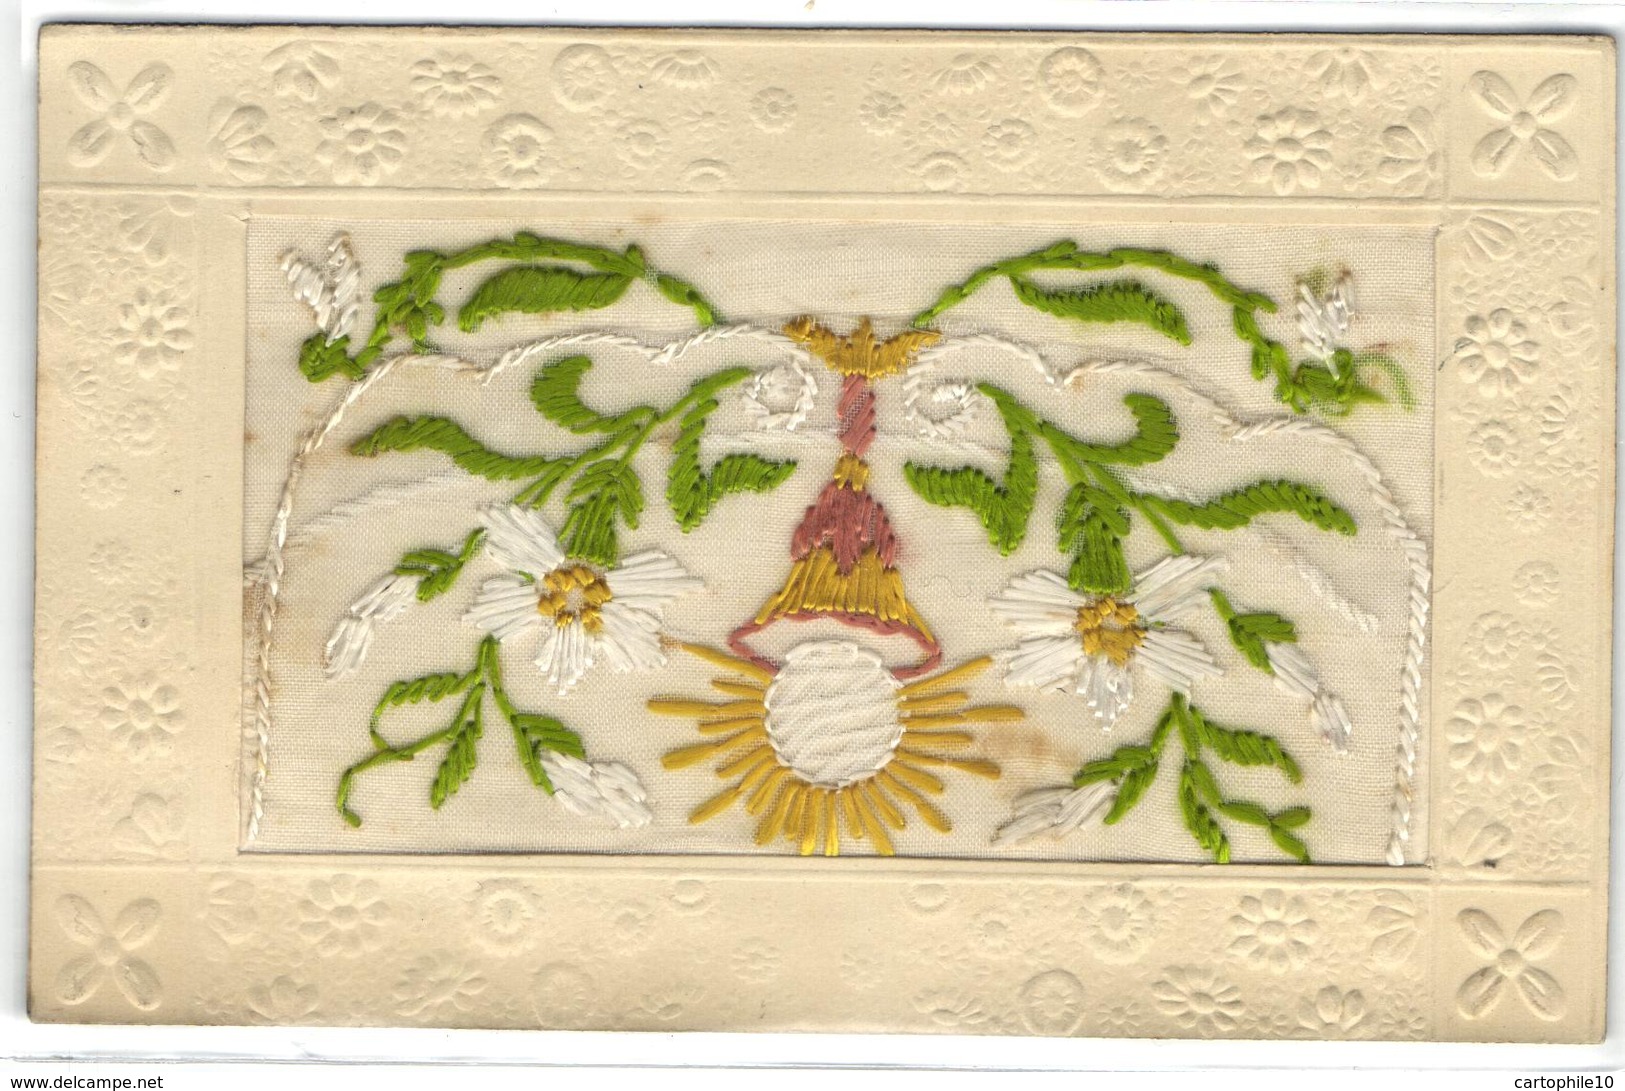 BELLE CARTE BRODEE       BONNE ANNEE - Embroidered